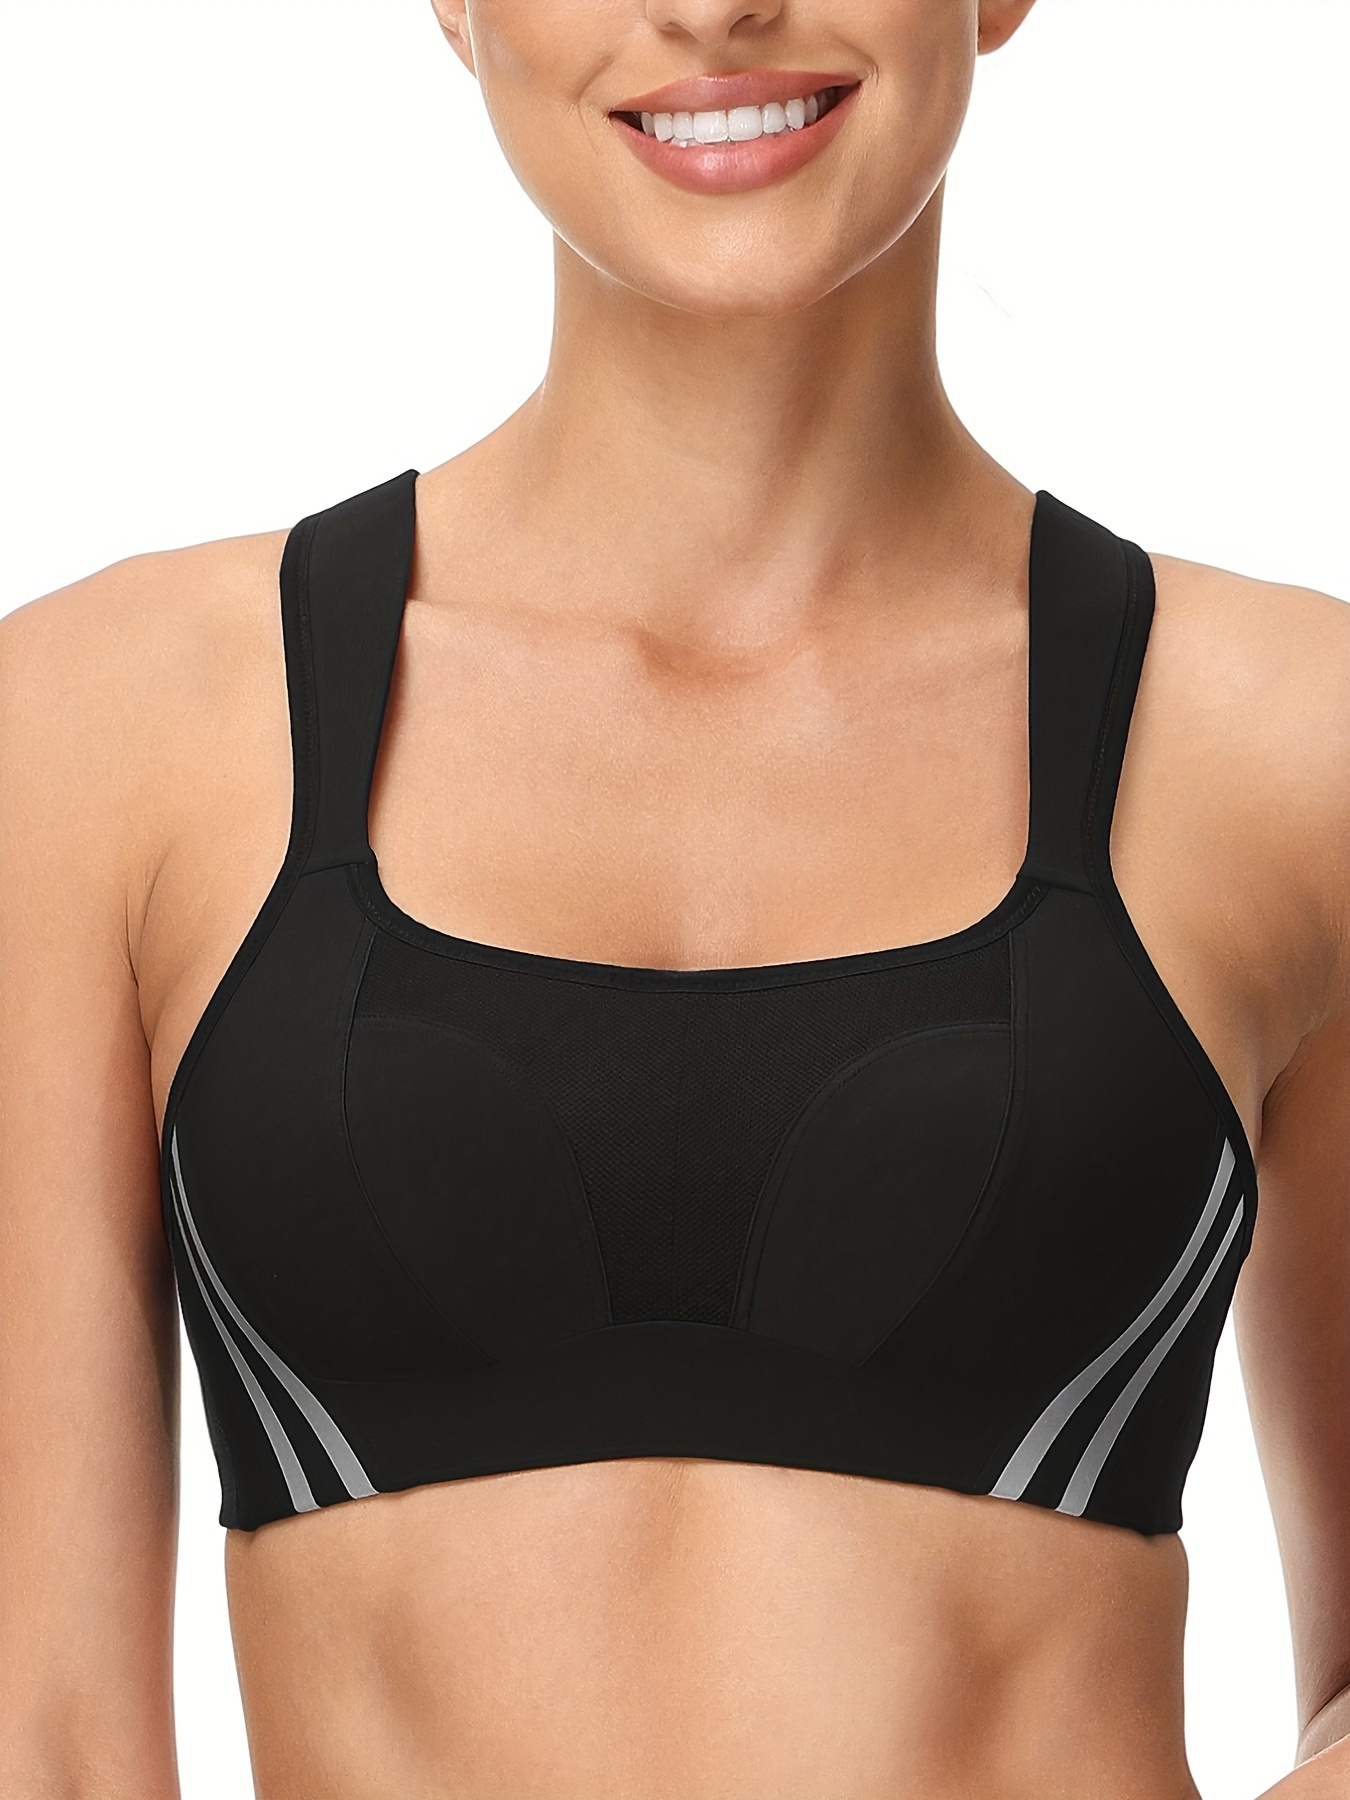 Gotoly Women's Front Closure Sports Bra Wirefree Padded Support